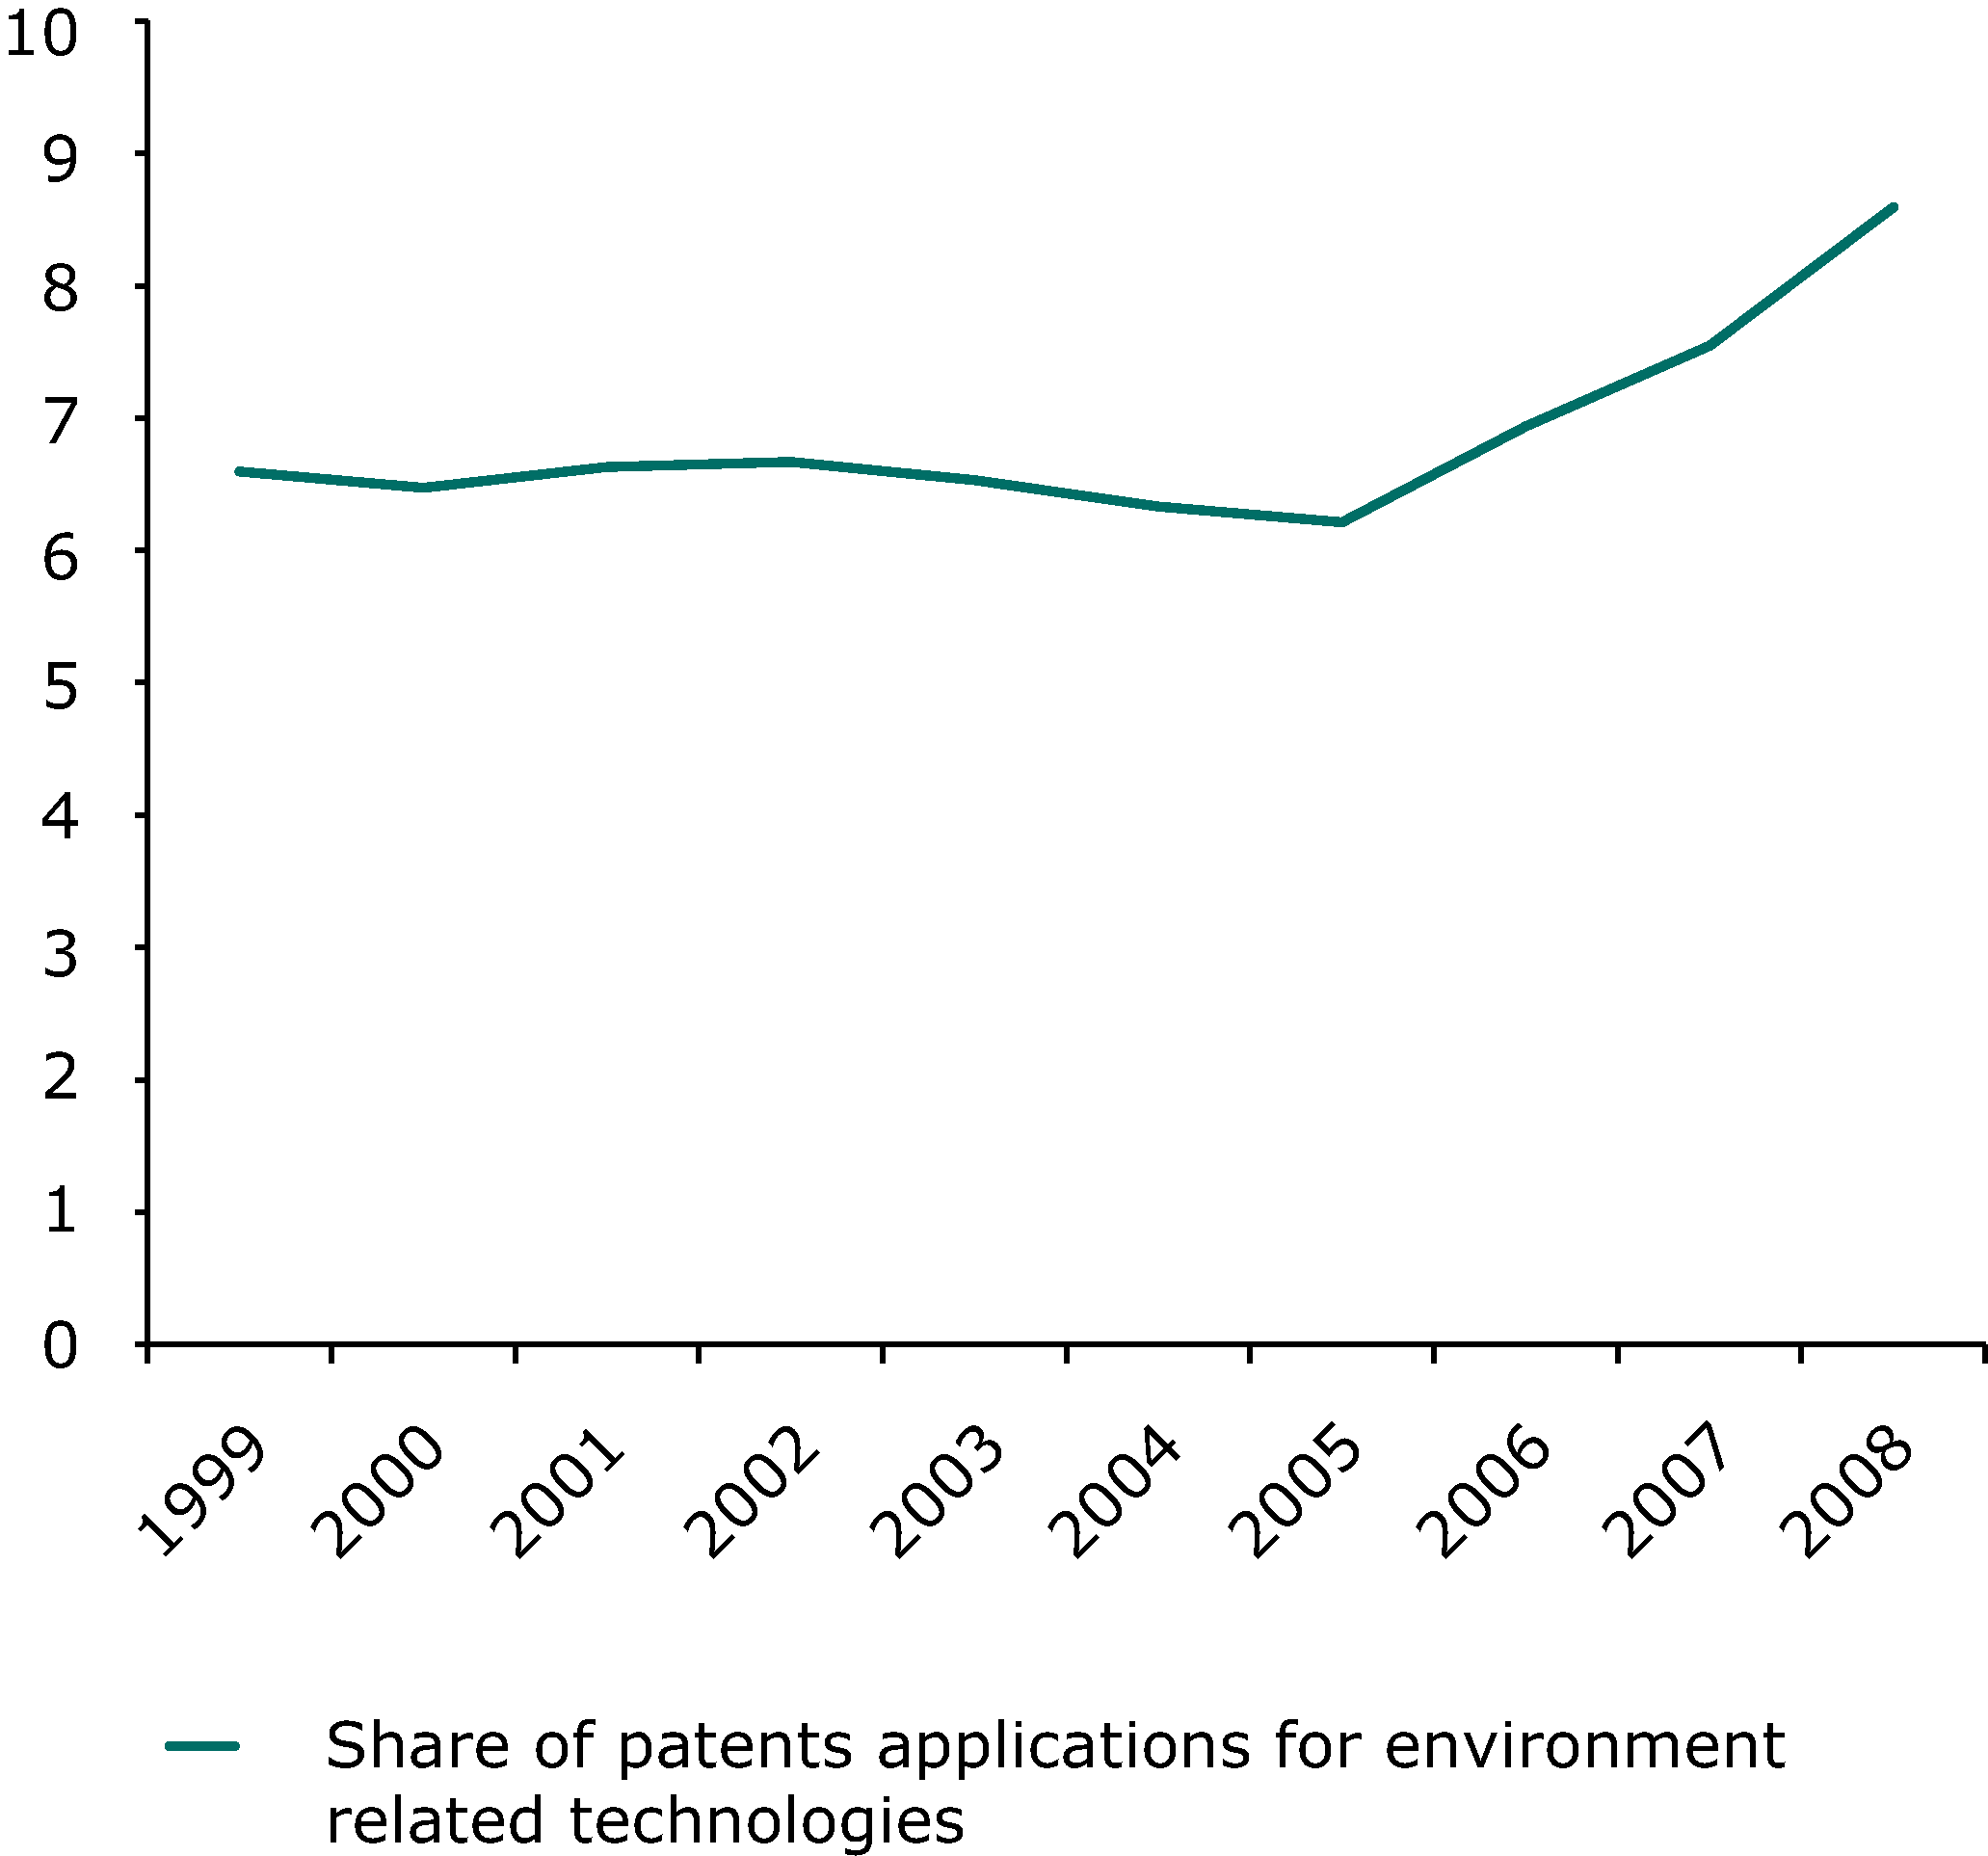 Share of environment-related patents applications in total European patents, 1999-2008